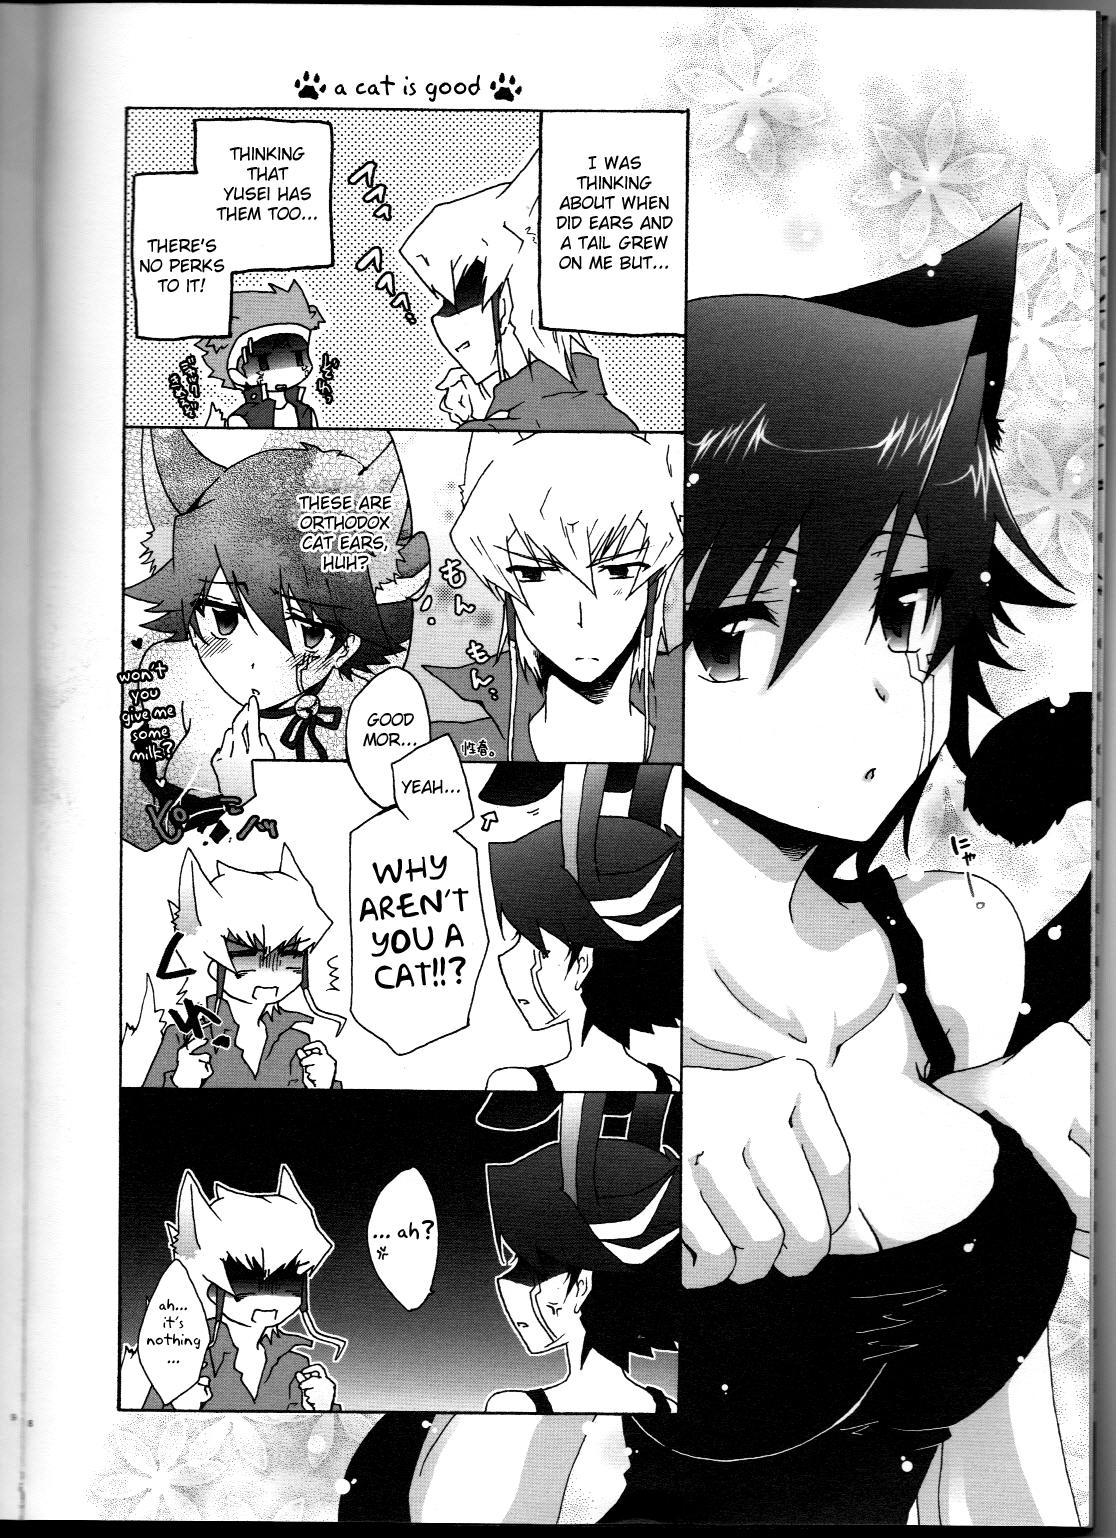 Real Couple Datte Kemono da mono. - Yu-gi-oh 5ds Piss - Page 8